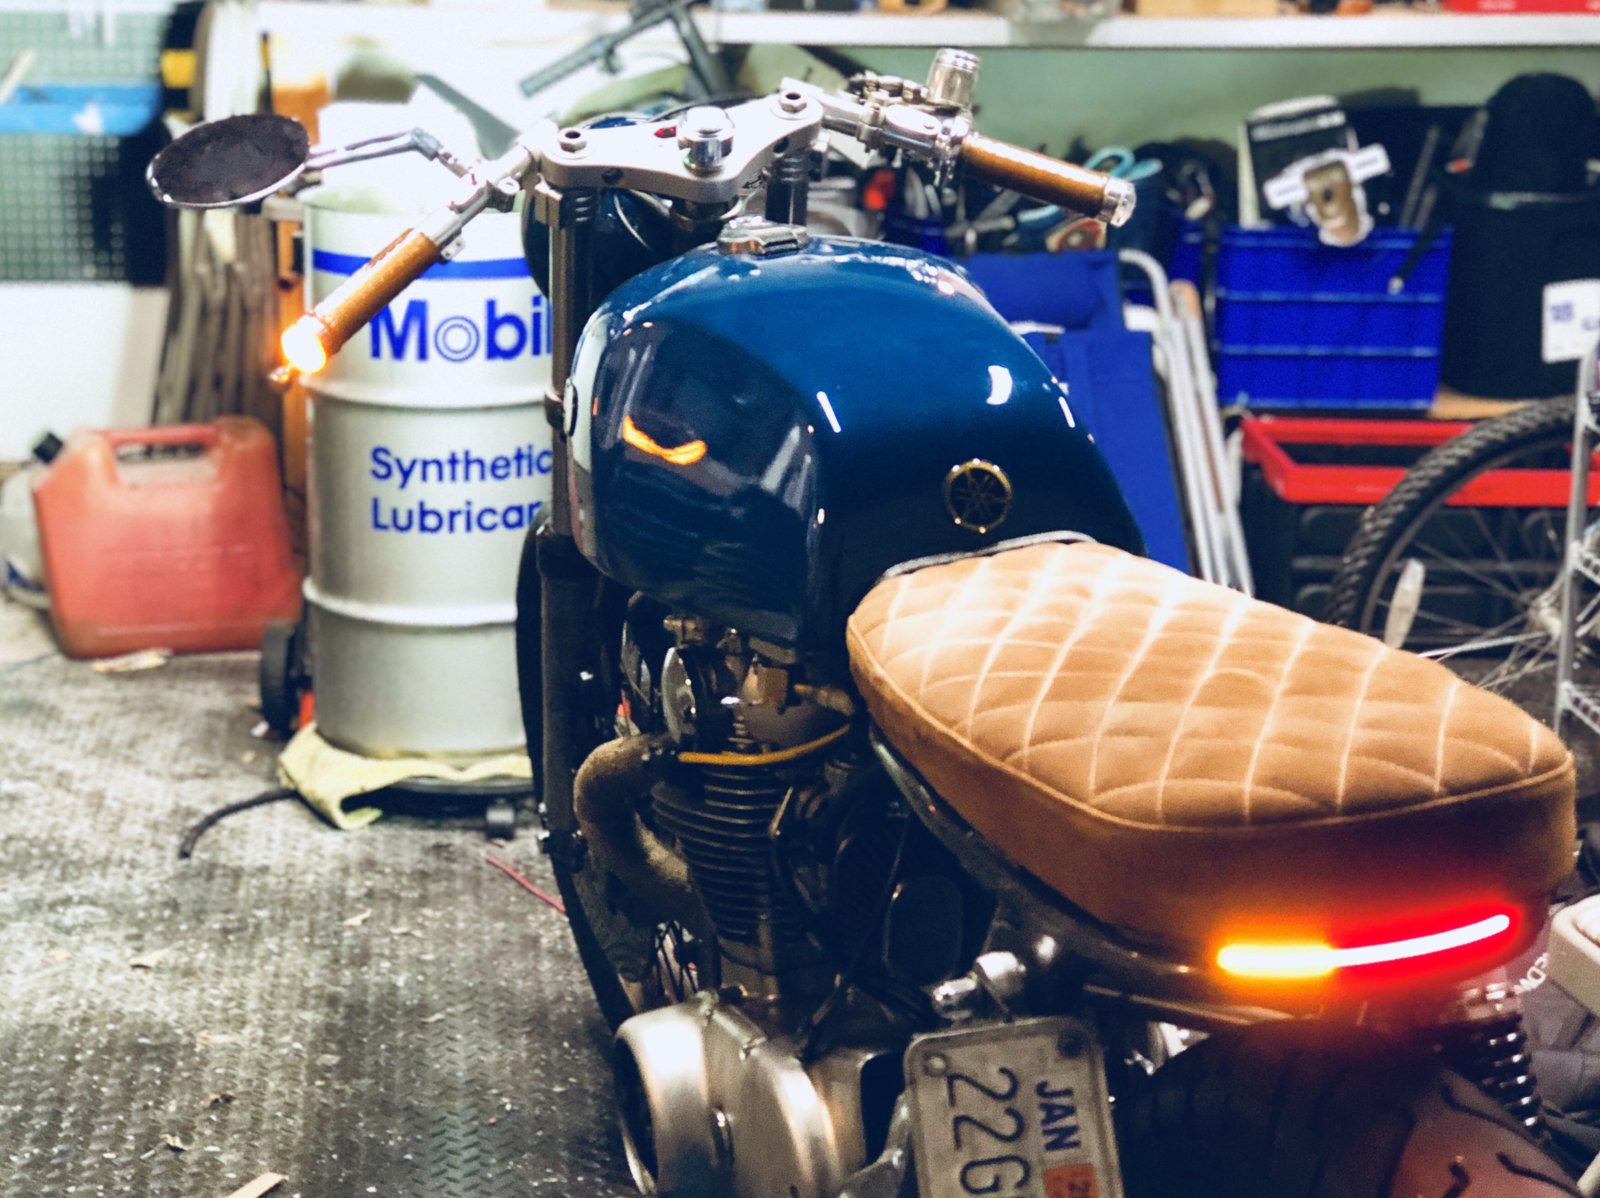 XS650 'Virgin' LED tail strip and bar end blinkers